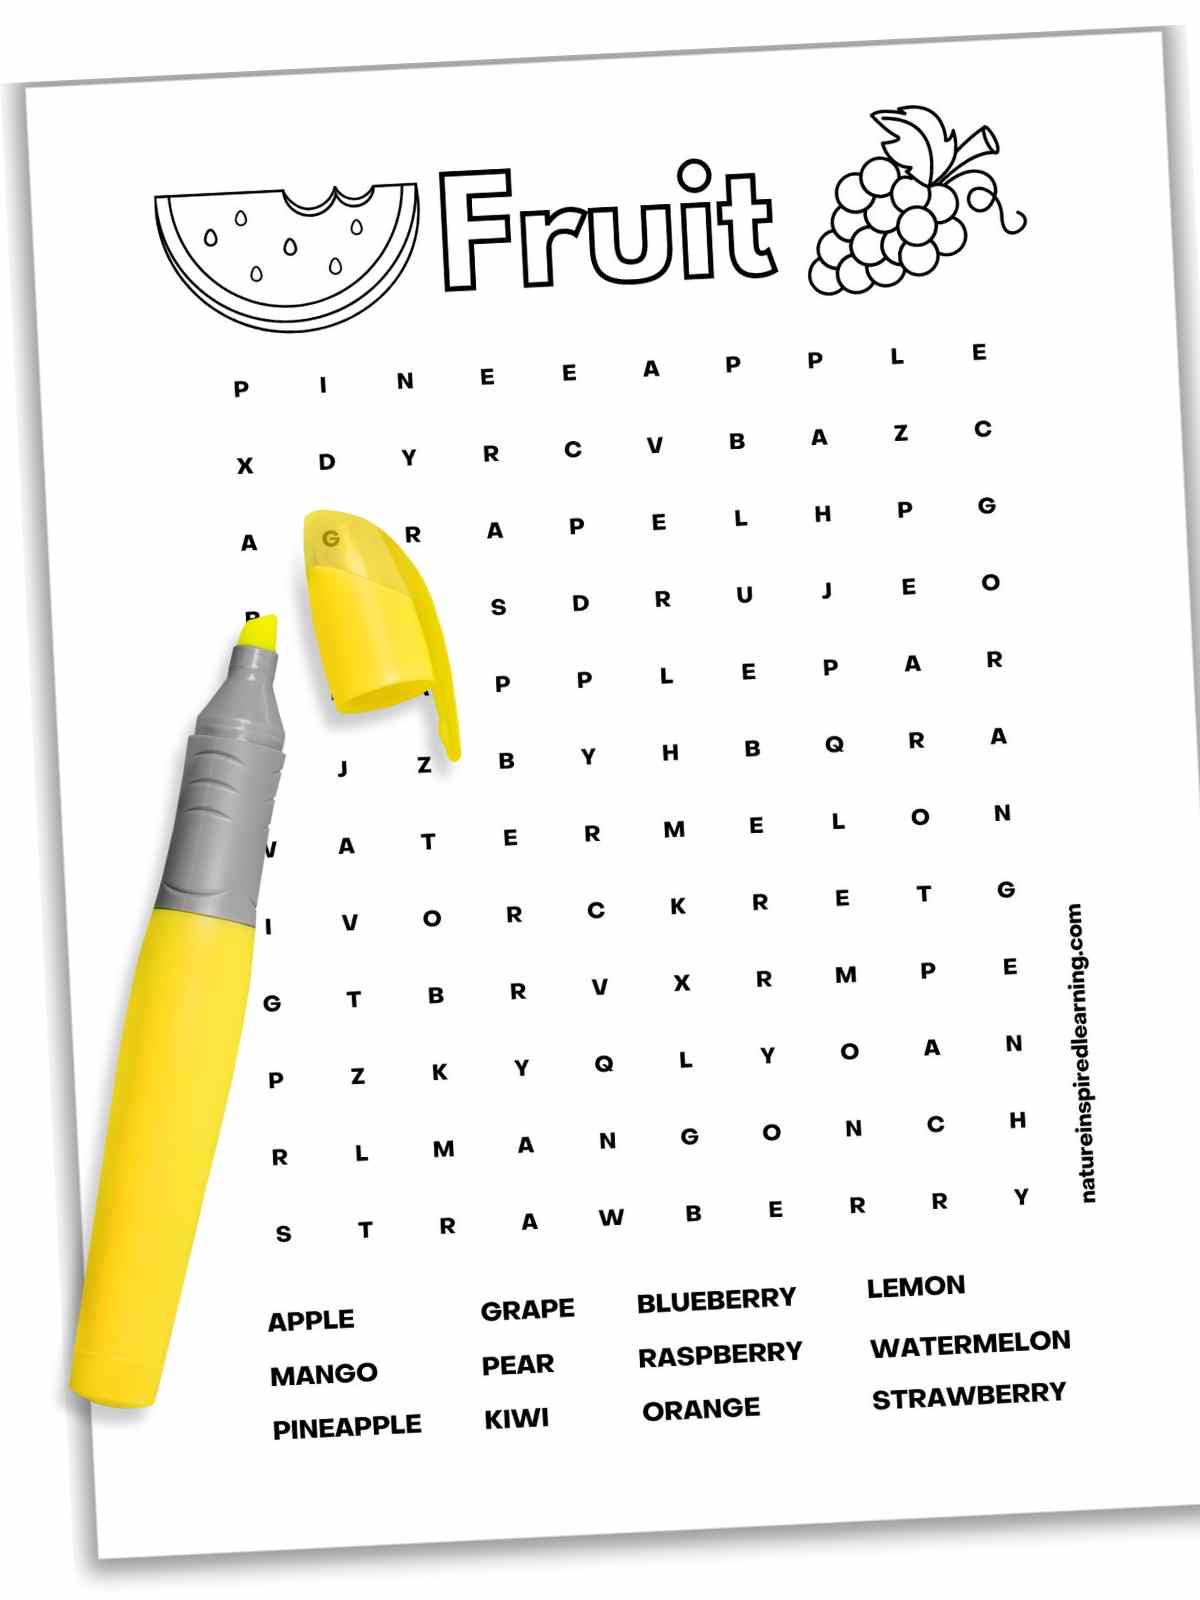 black and white fruit word search with a yellow highlighter with the cover on the left side of the sheet.